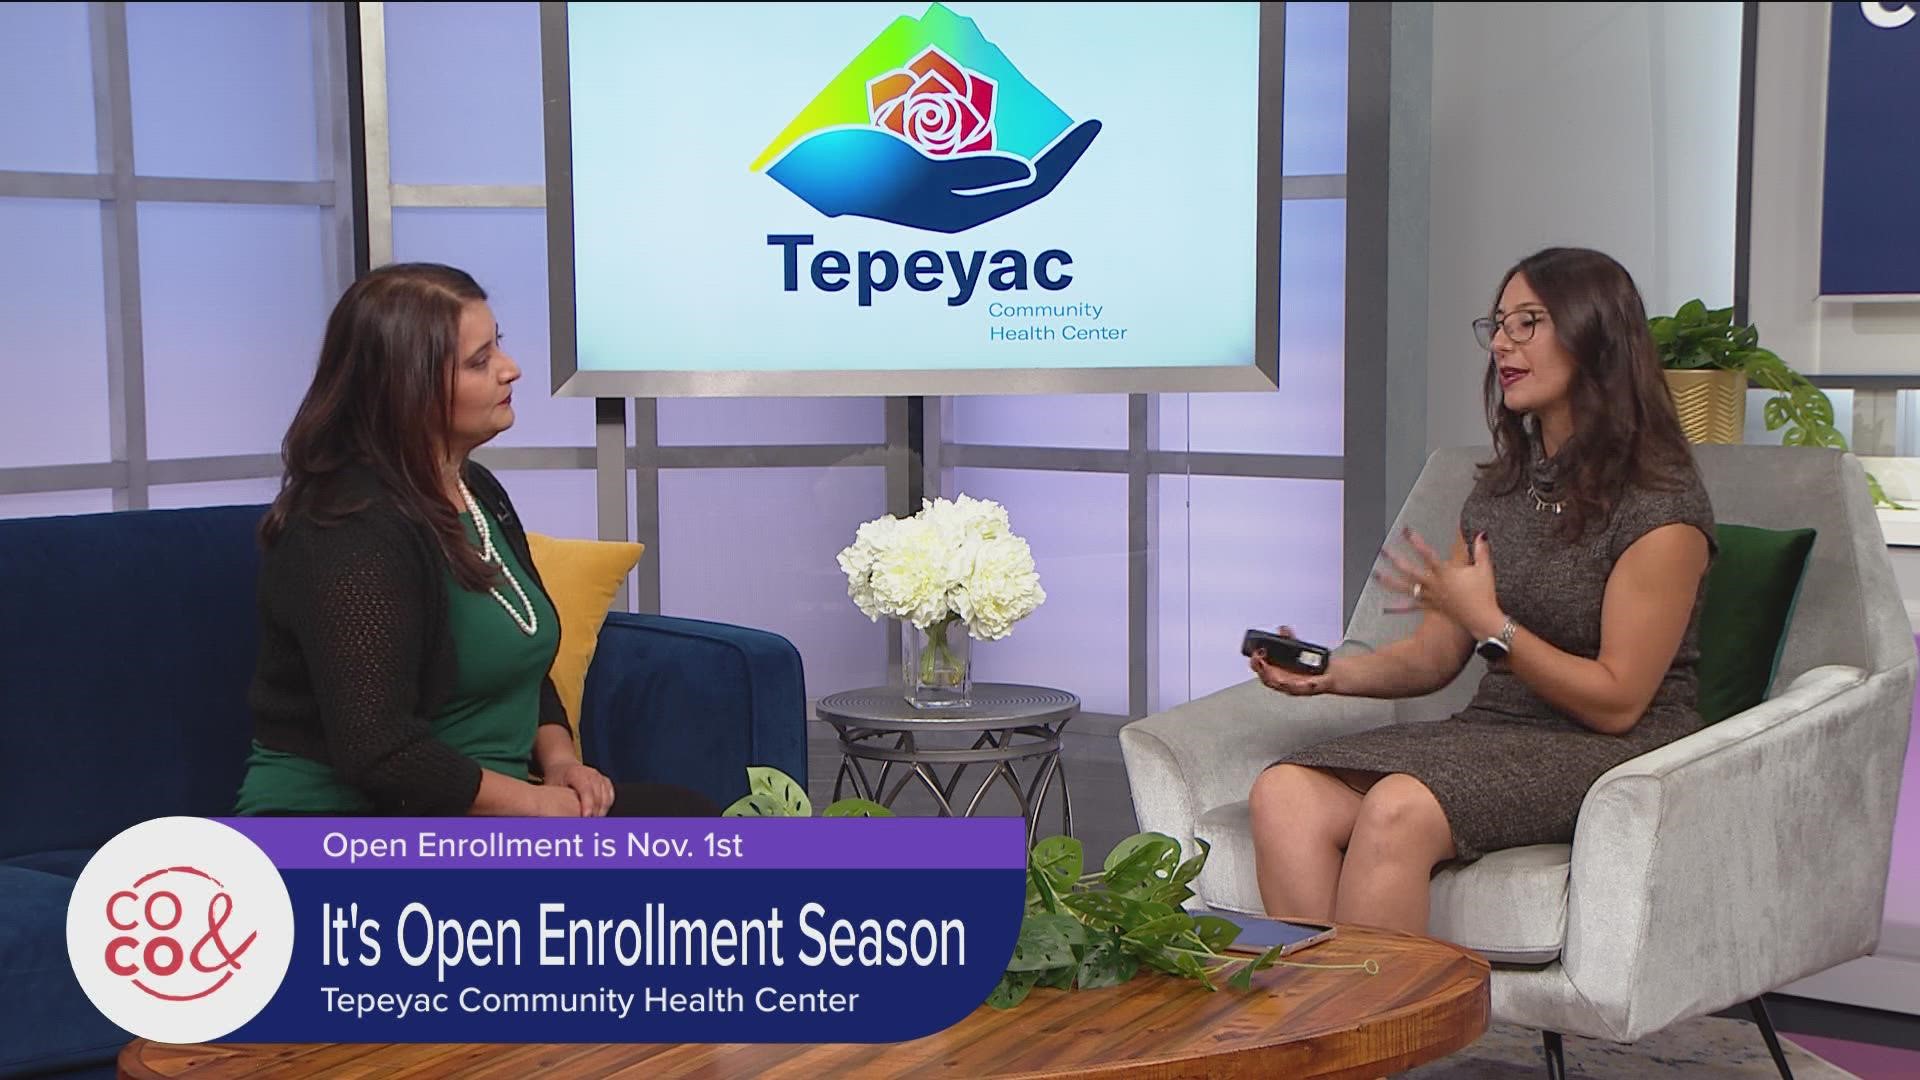 Open Enrollment kicks off on November 1st! Visit TepeyacHealth.org or call 303.458.5302 to get started. **PAID CONTENT**